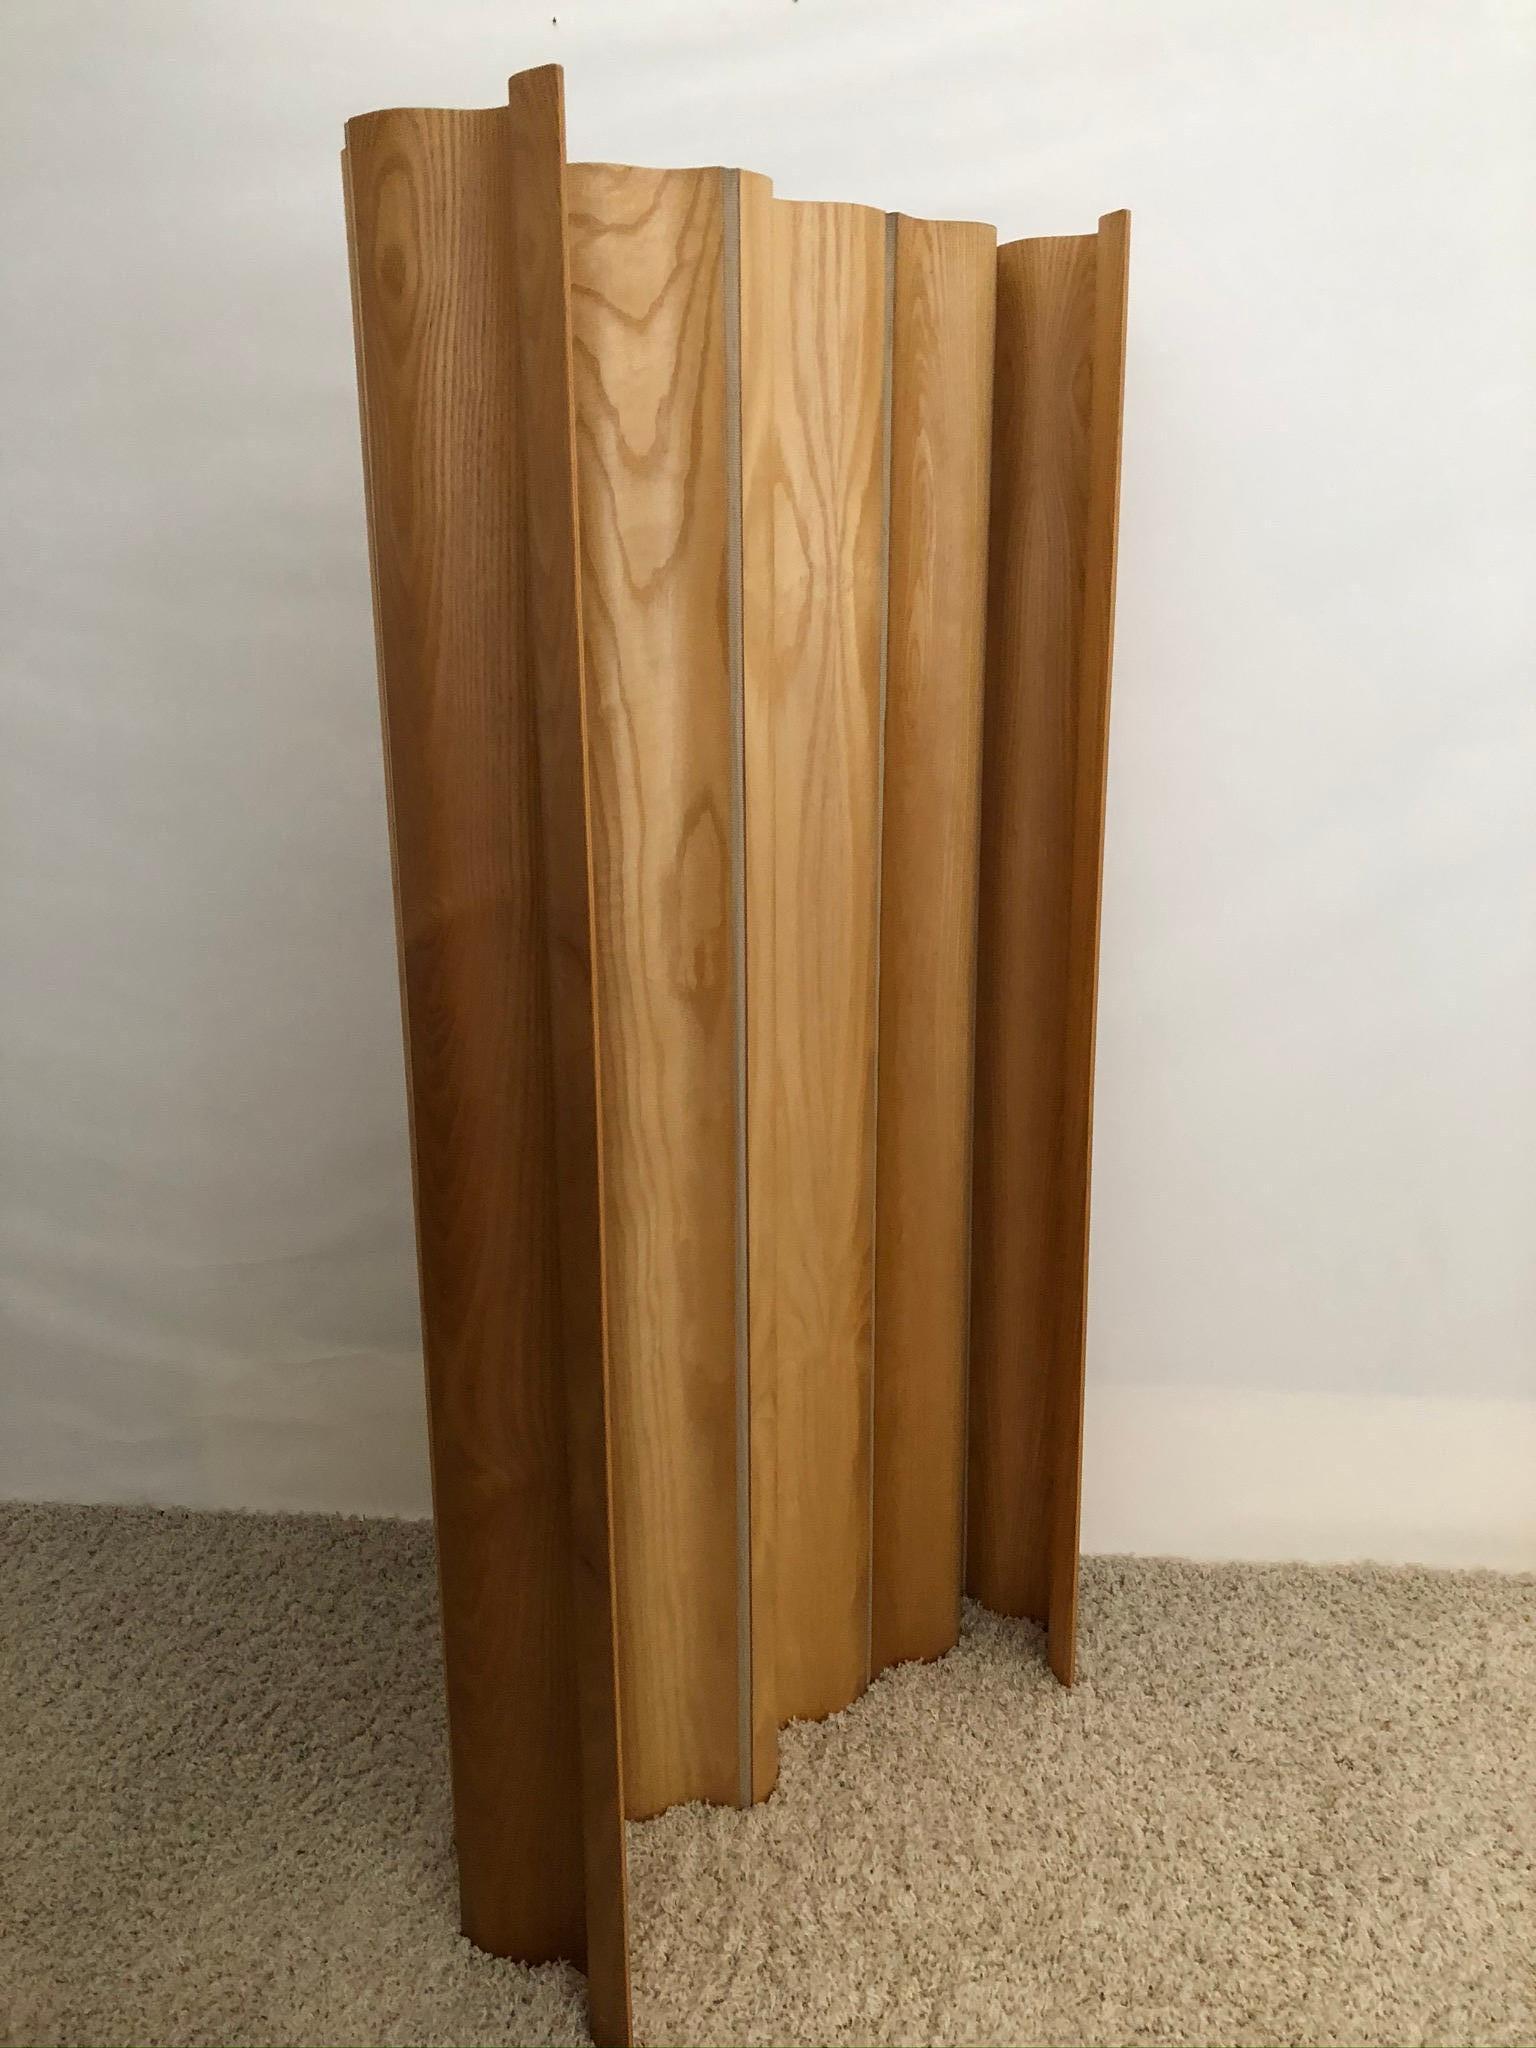 American Charles and Ray Eames Ash/Birch Molded Plywood Folding Room Divider Screen